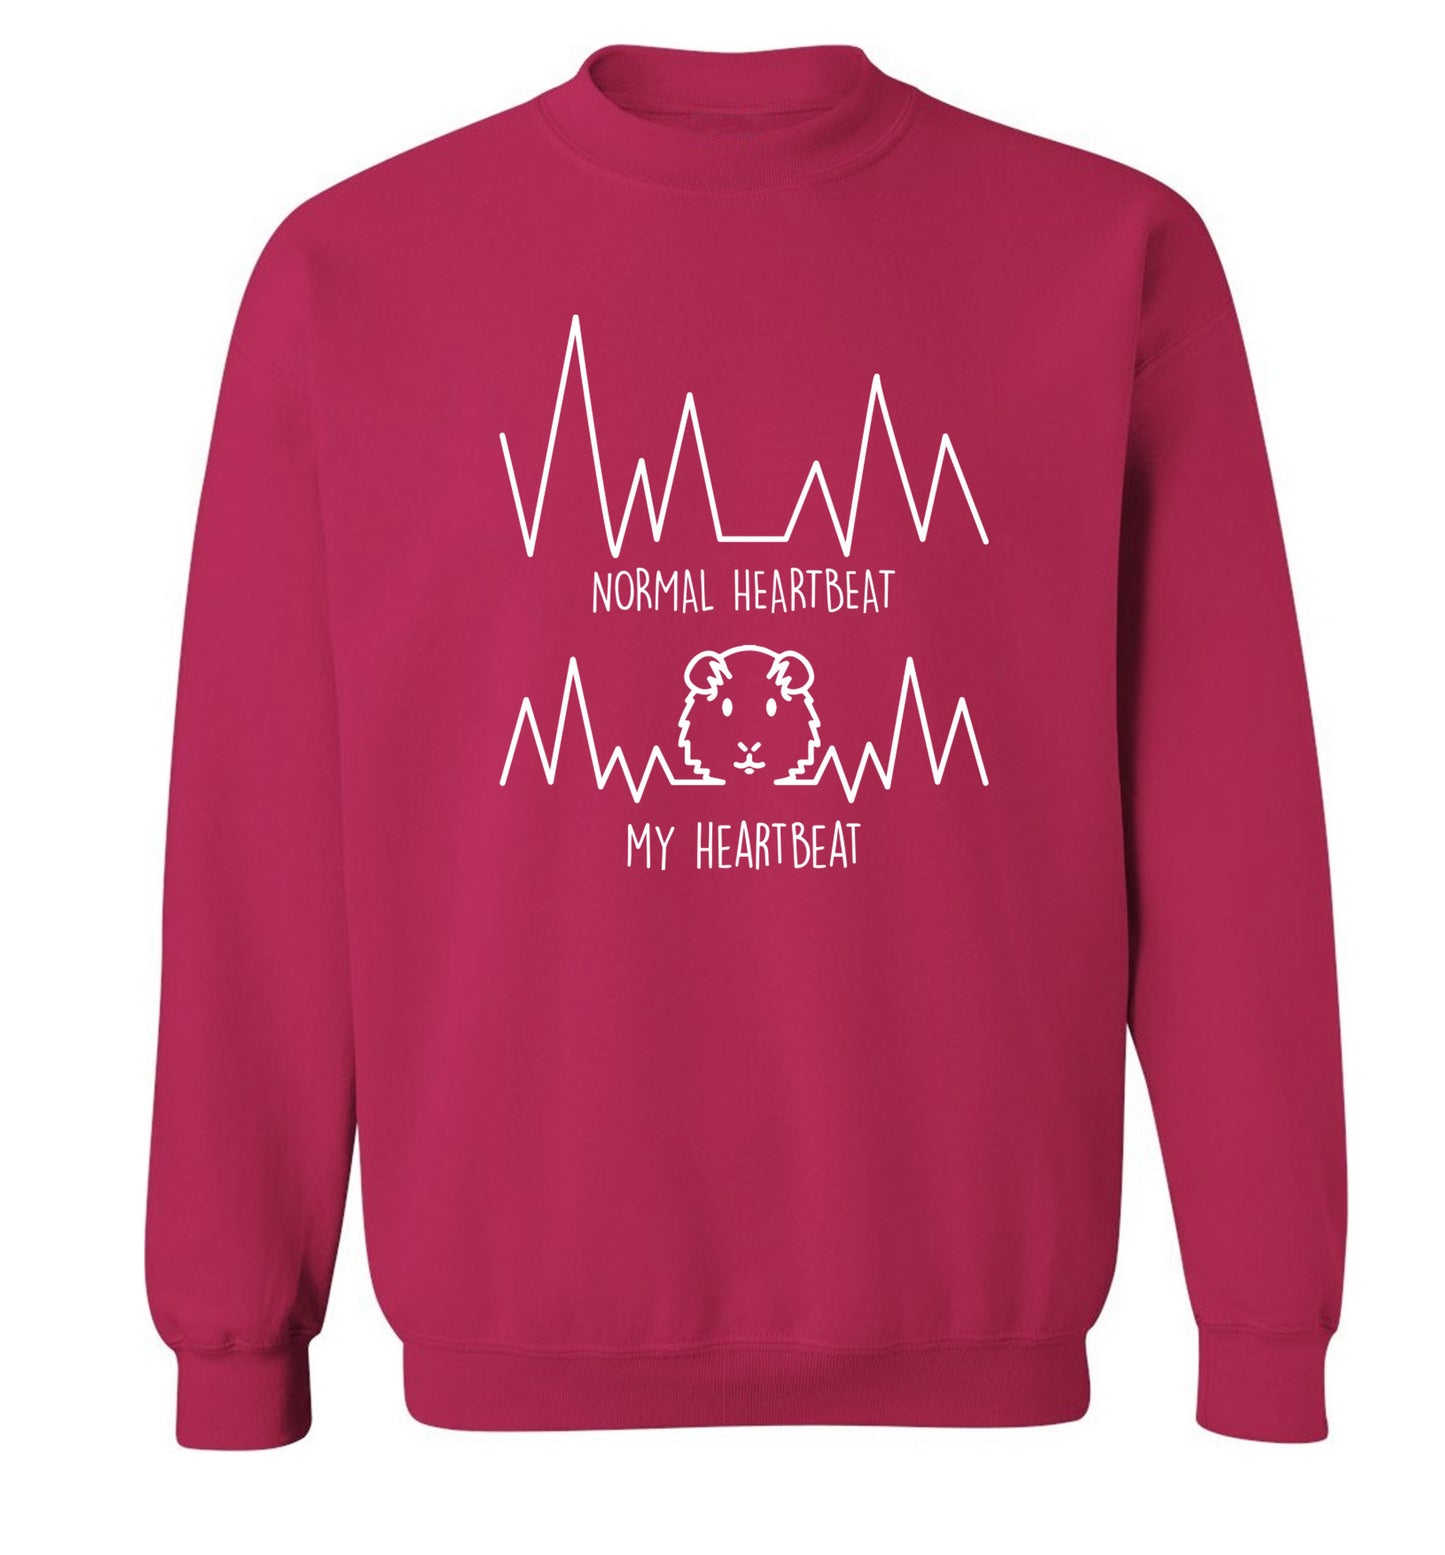 Normal heartbeat vs my heartbeat guinea pig lover Adult's unisex pink  sweater XL